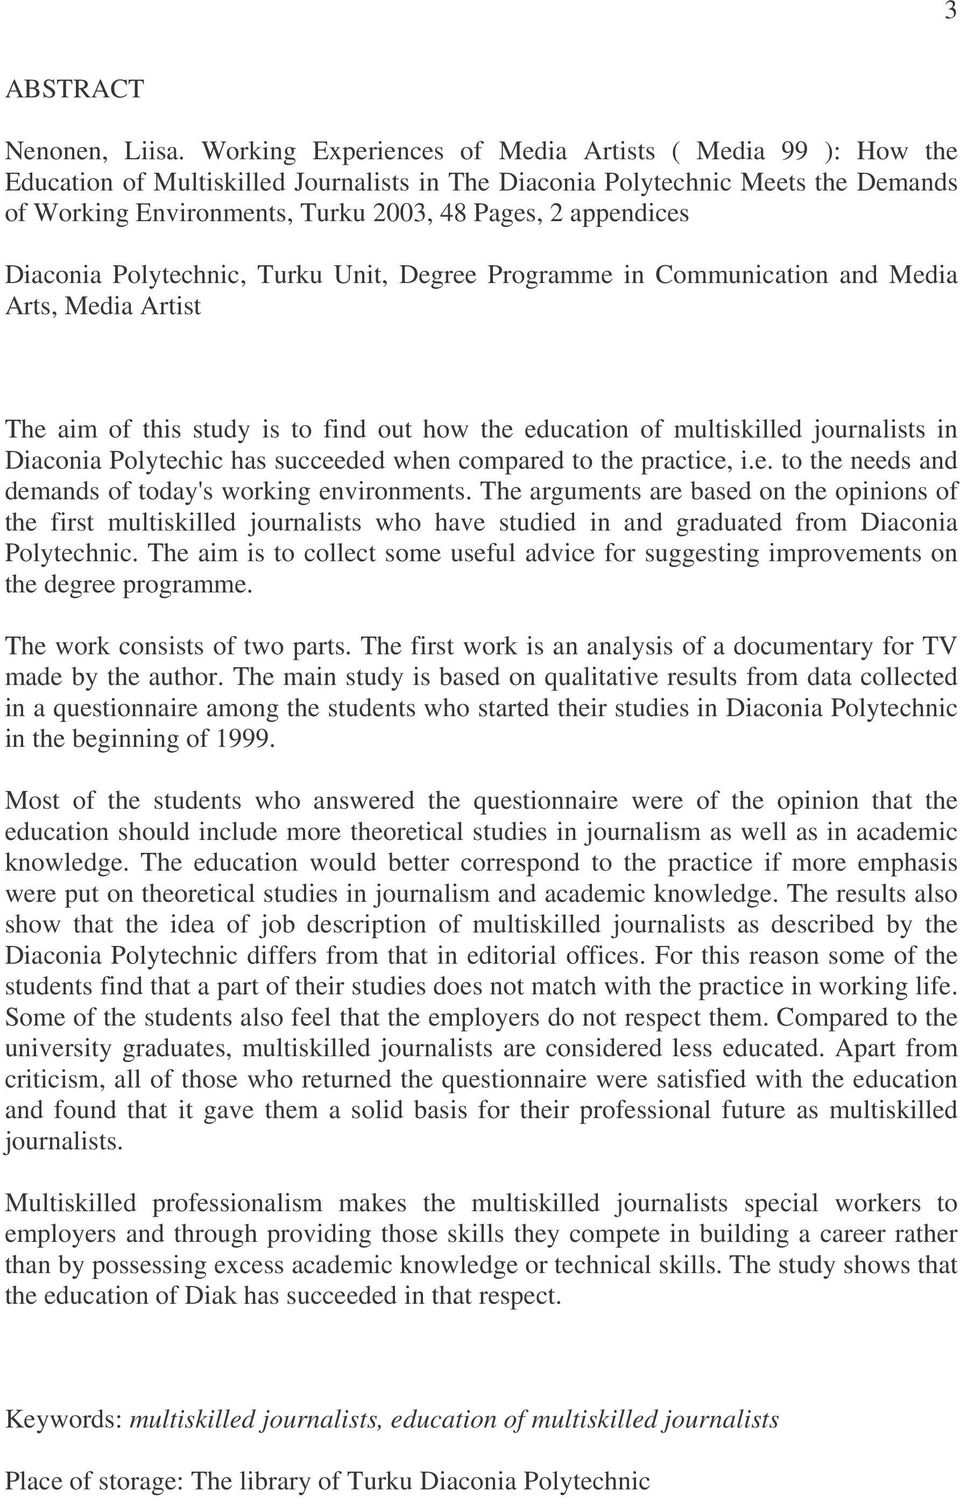 appendices Diaconia Polytechnic, Turku Unit, Degree Programme in Communication and Media Arts, Media Artist The aim of this study is to find out how the education of multiskilled journalists in